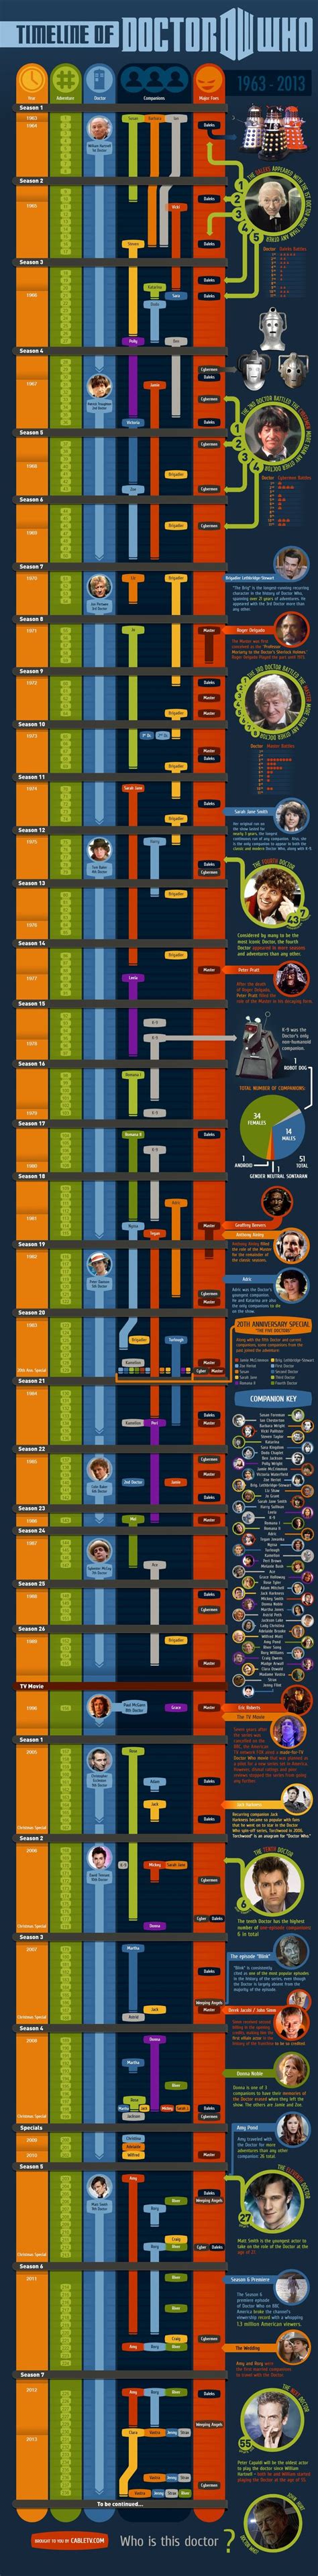 Doctor Who Timeline Infographic Doctor Who Timeline